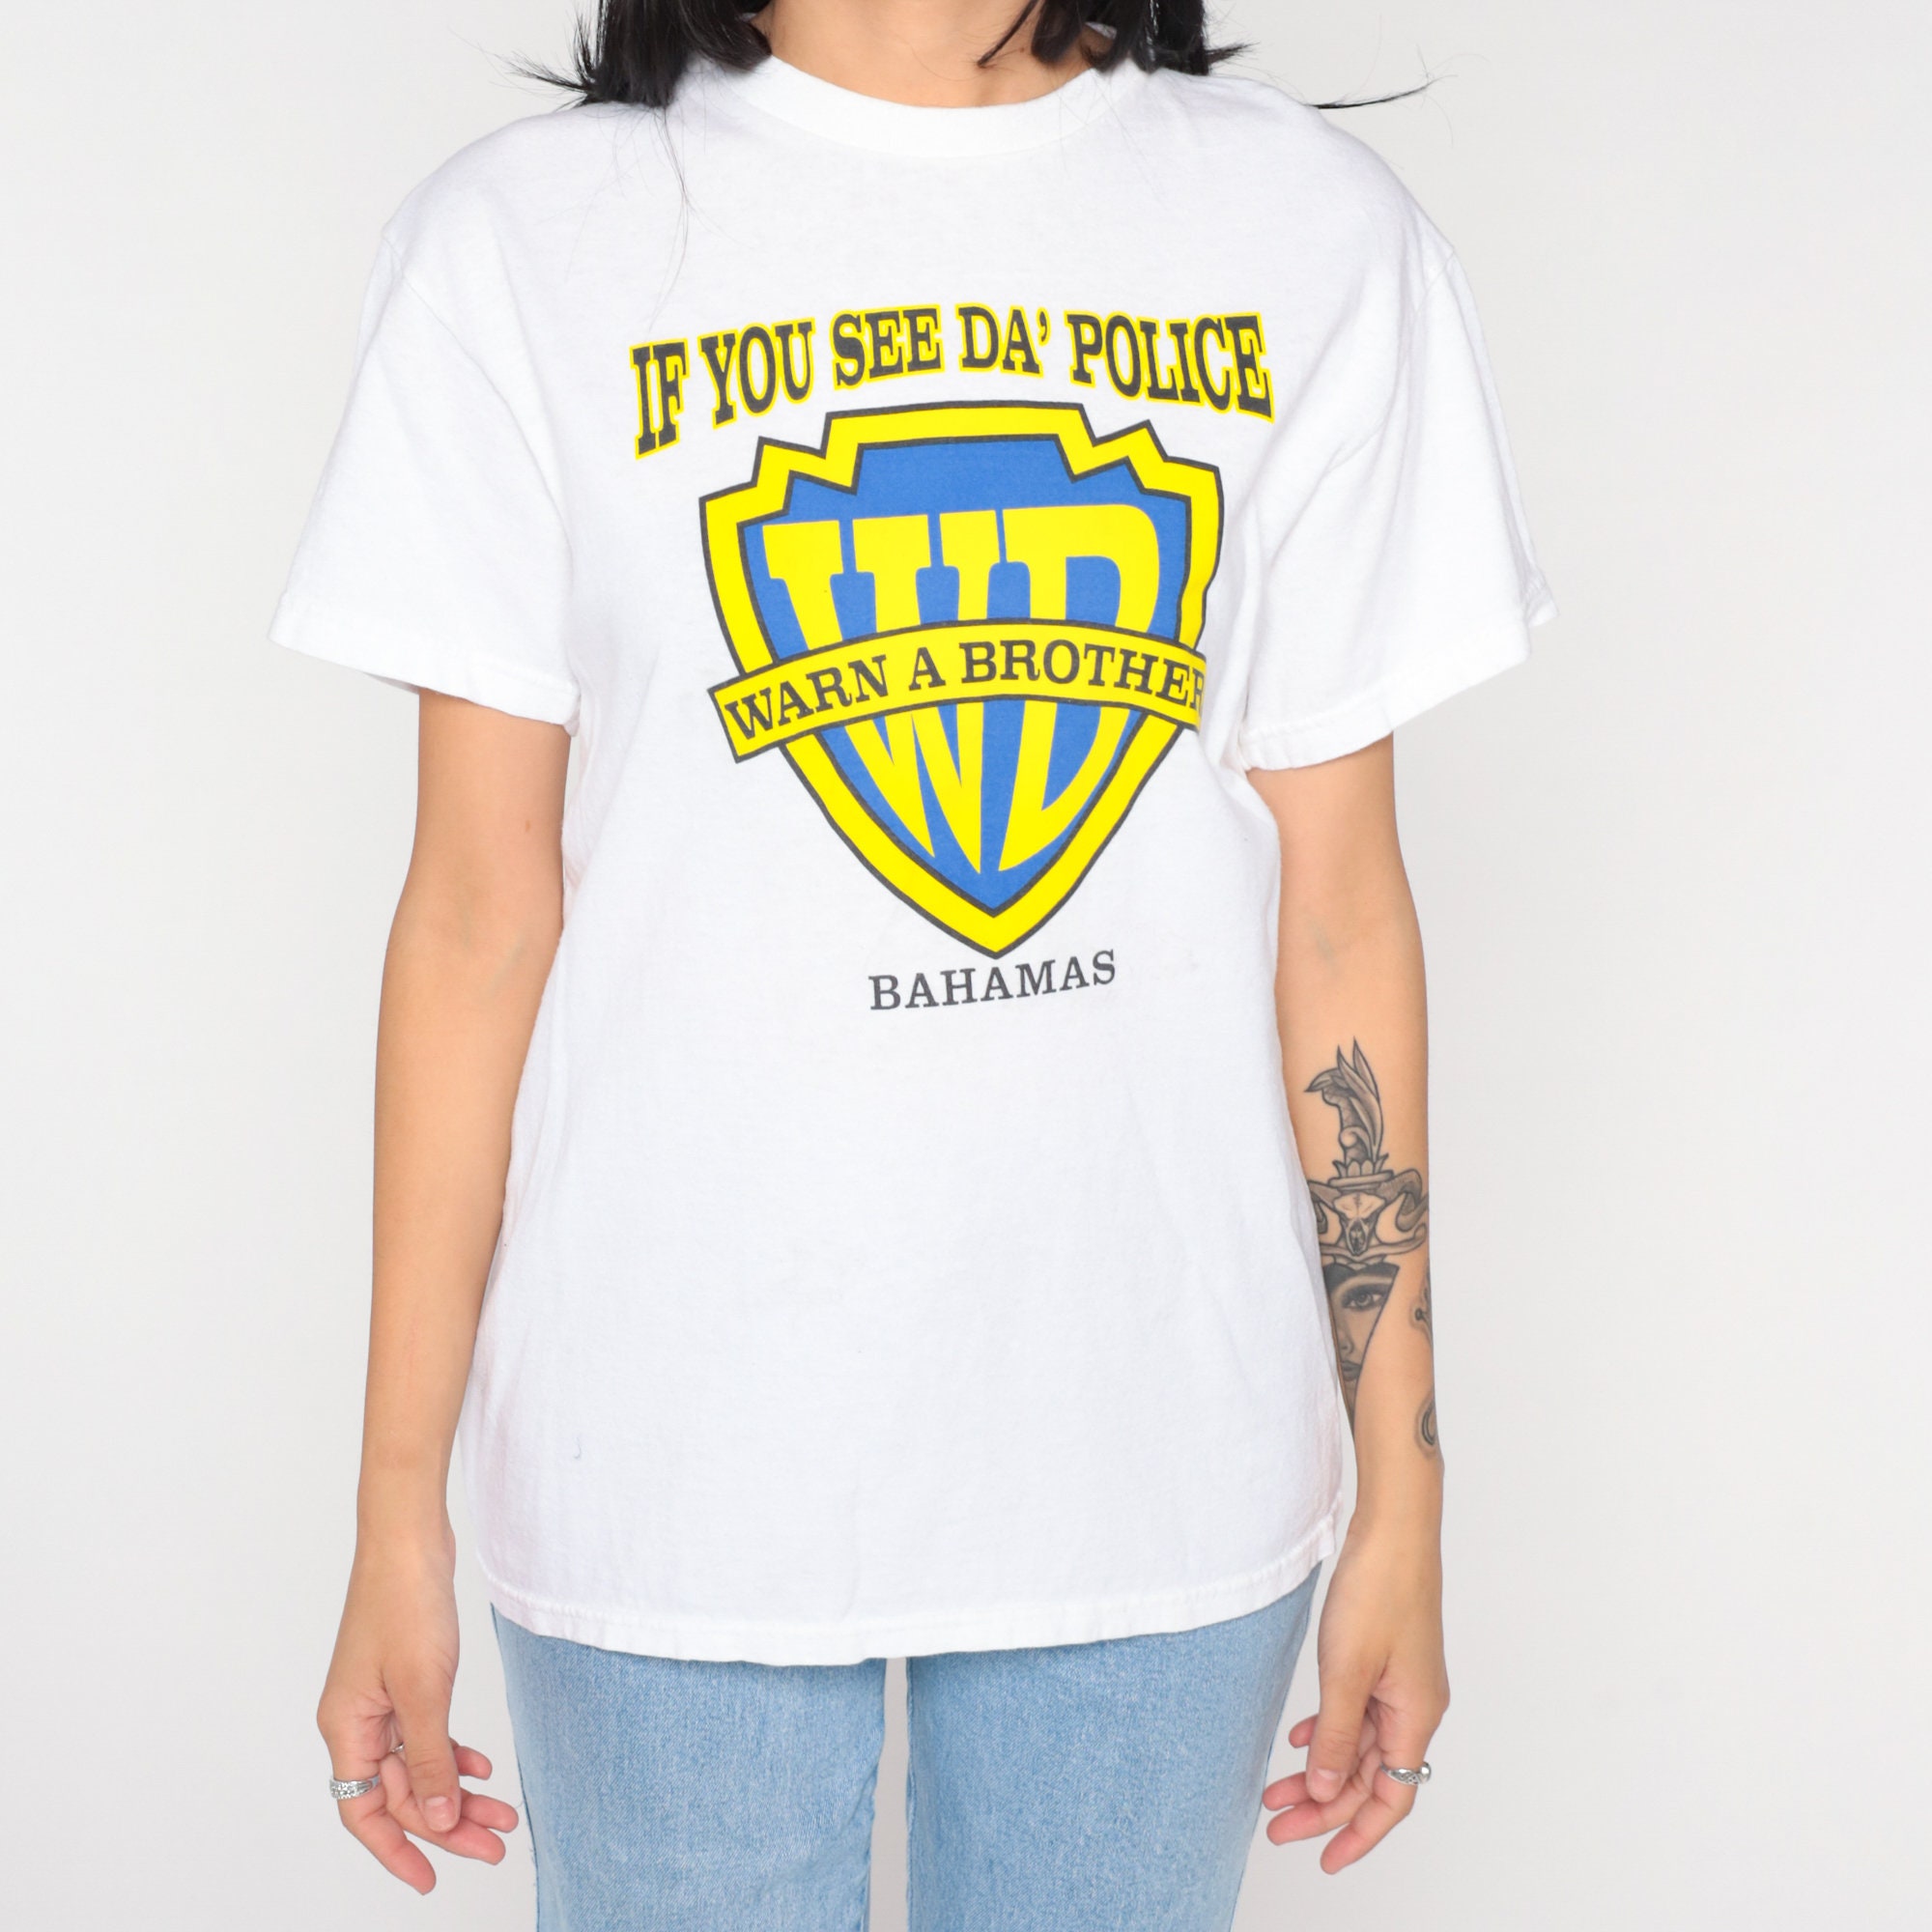 00s Warn a Brother Shirt If You See Da Police Bahamas Graphic - Etsy